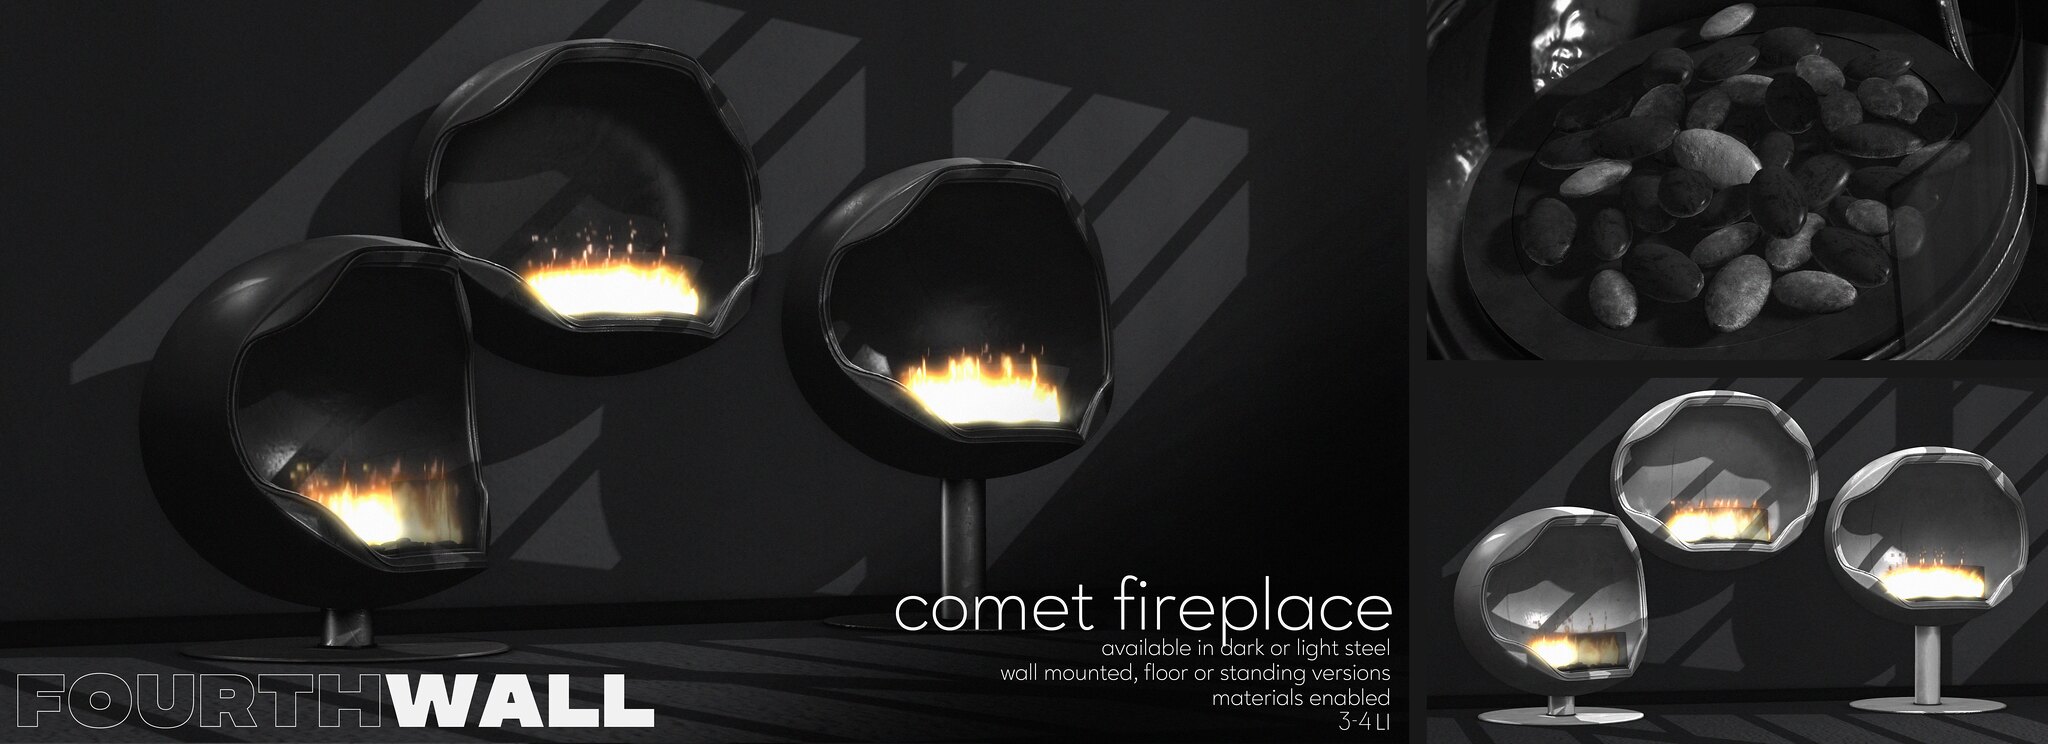 Fourth Wall – Comet Fireplace